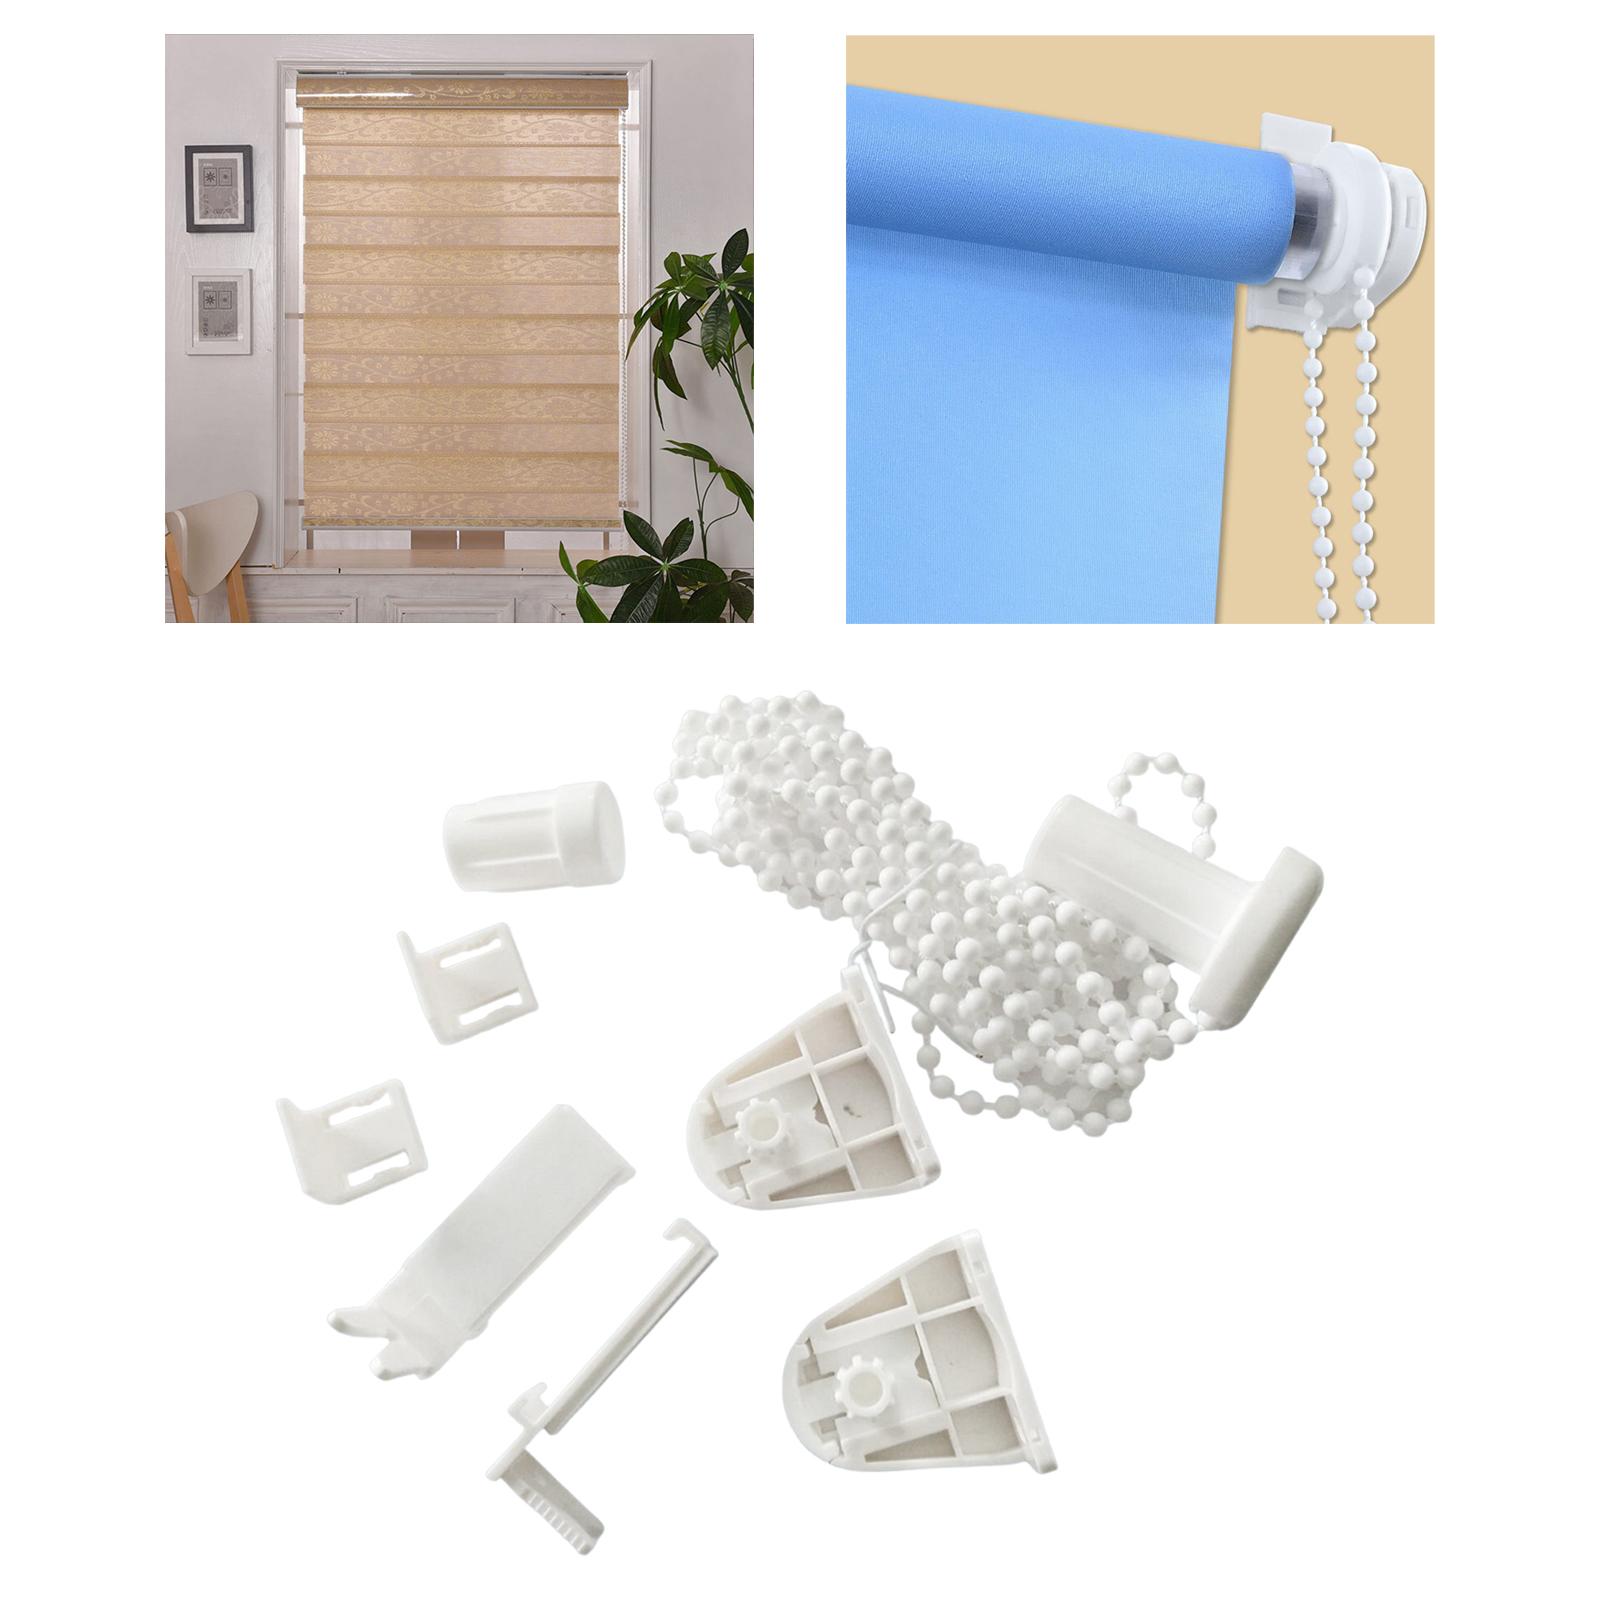 Roller Blind Fittings Kit Spares Set Curtain Roller Chain Cord Clutch 1 Set